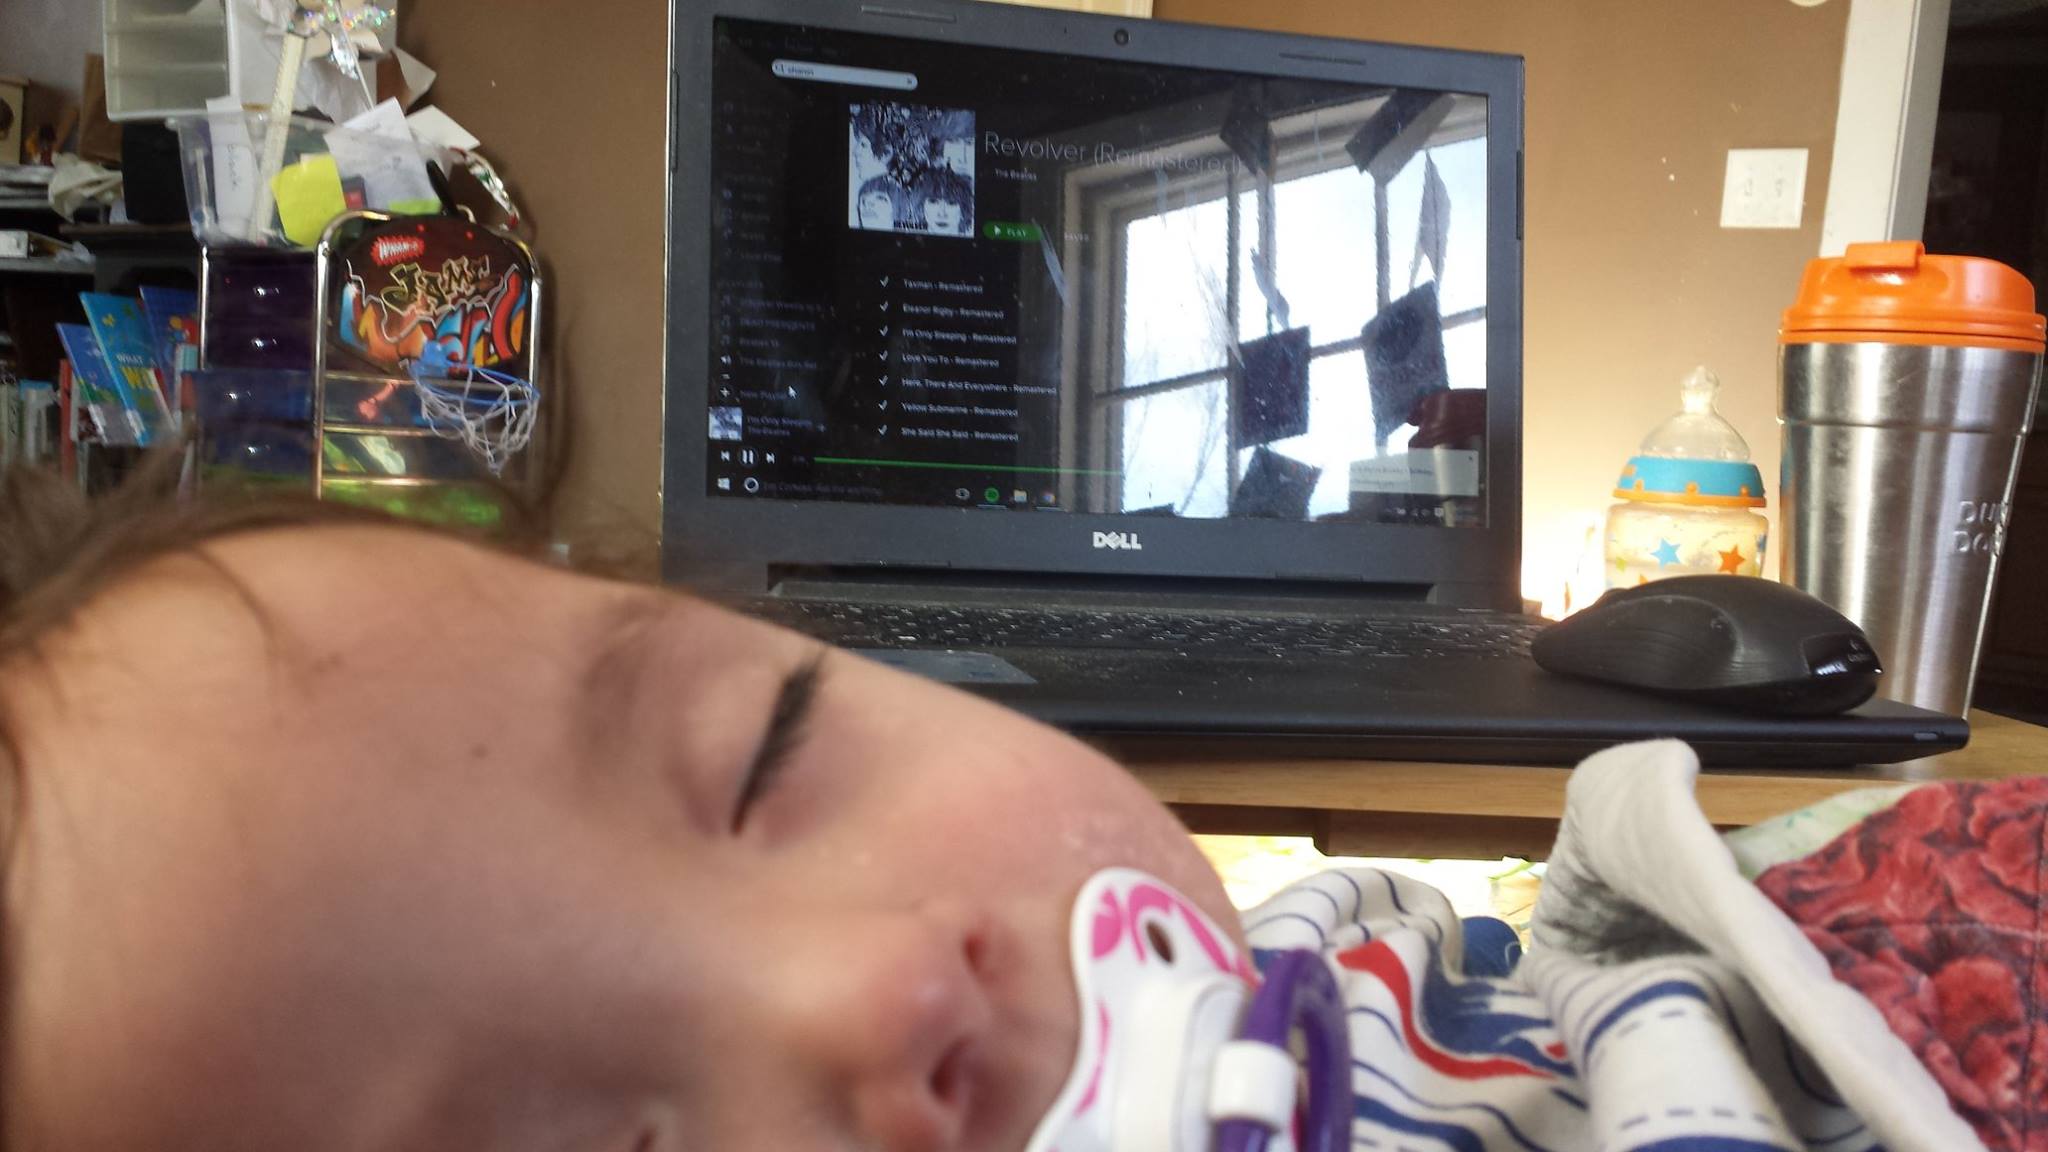 Baby boy is sleeping while the laptop screen shows "I'm Only Sleeping" by The Beatles is playing